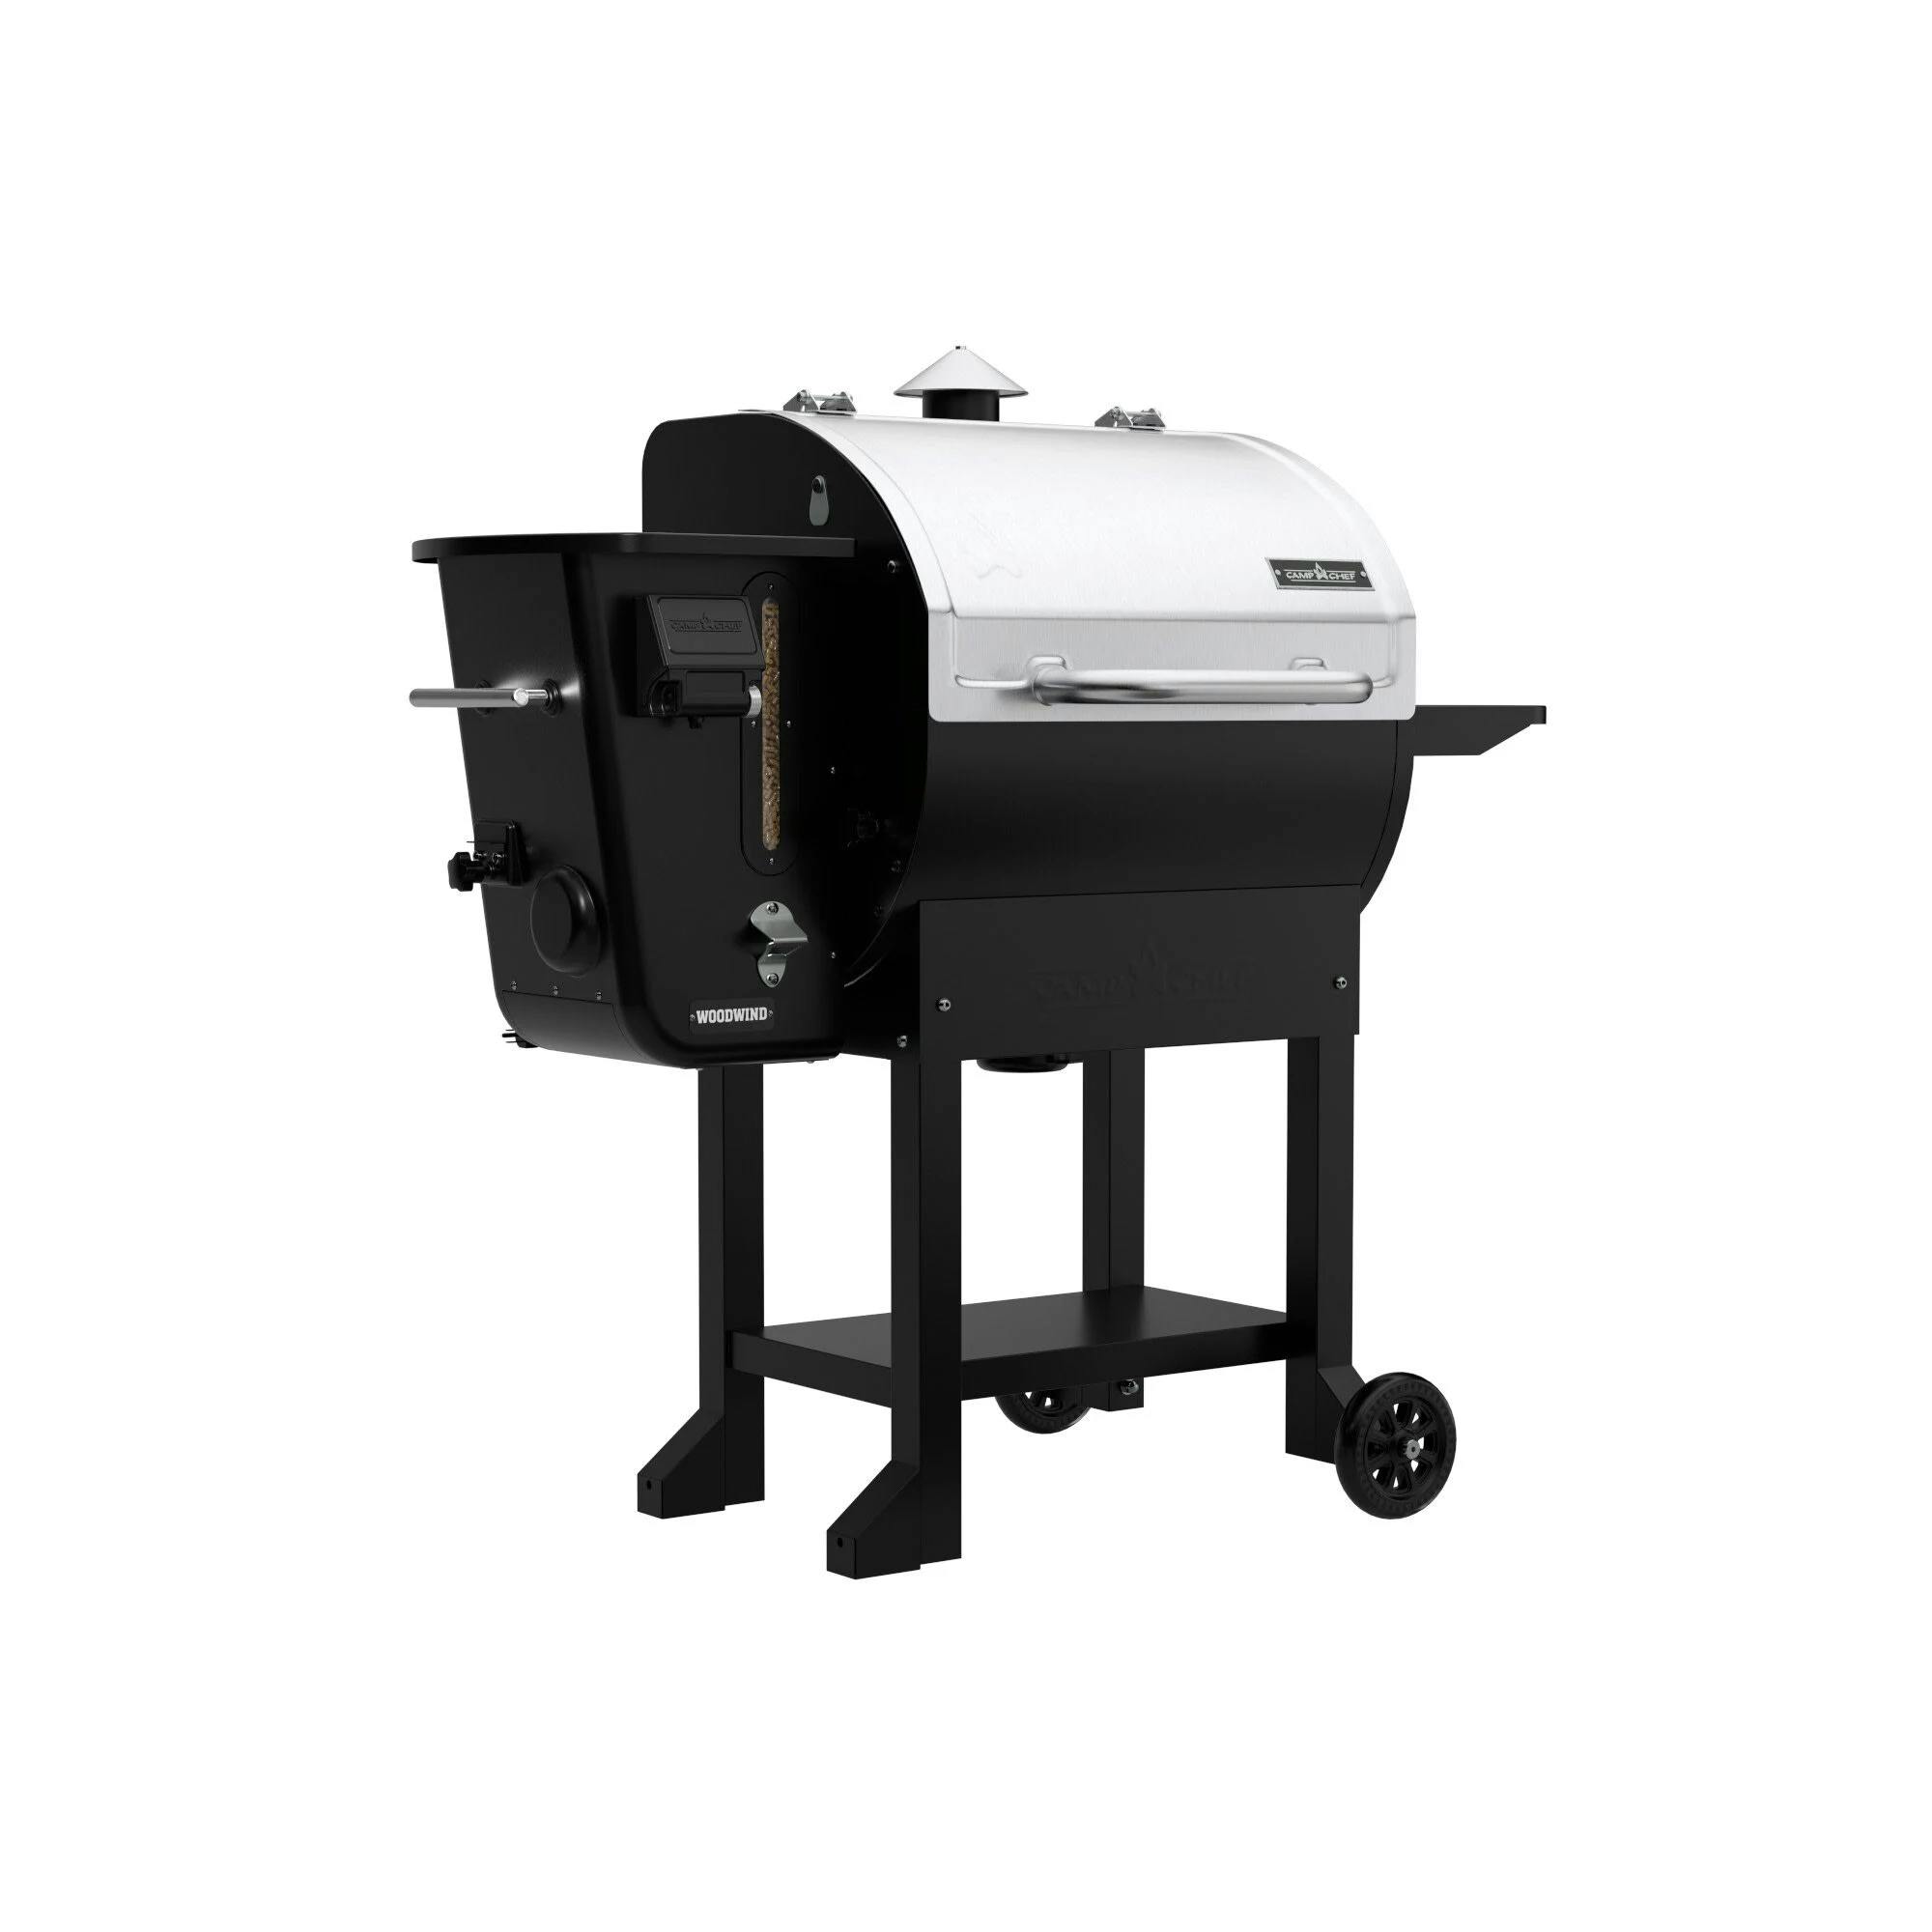 Camp Chef Woodwind WiFi Pellet Grill